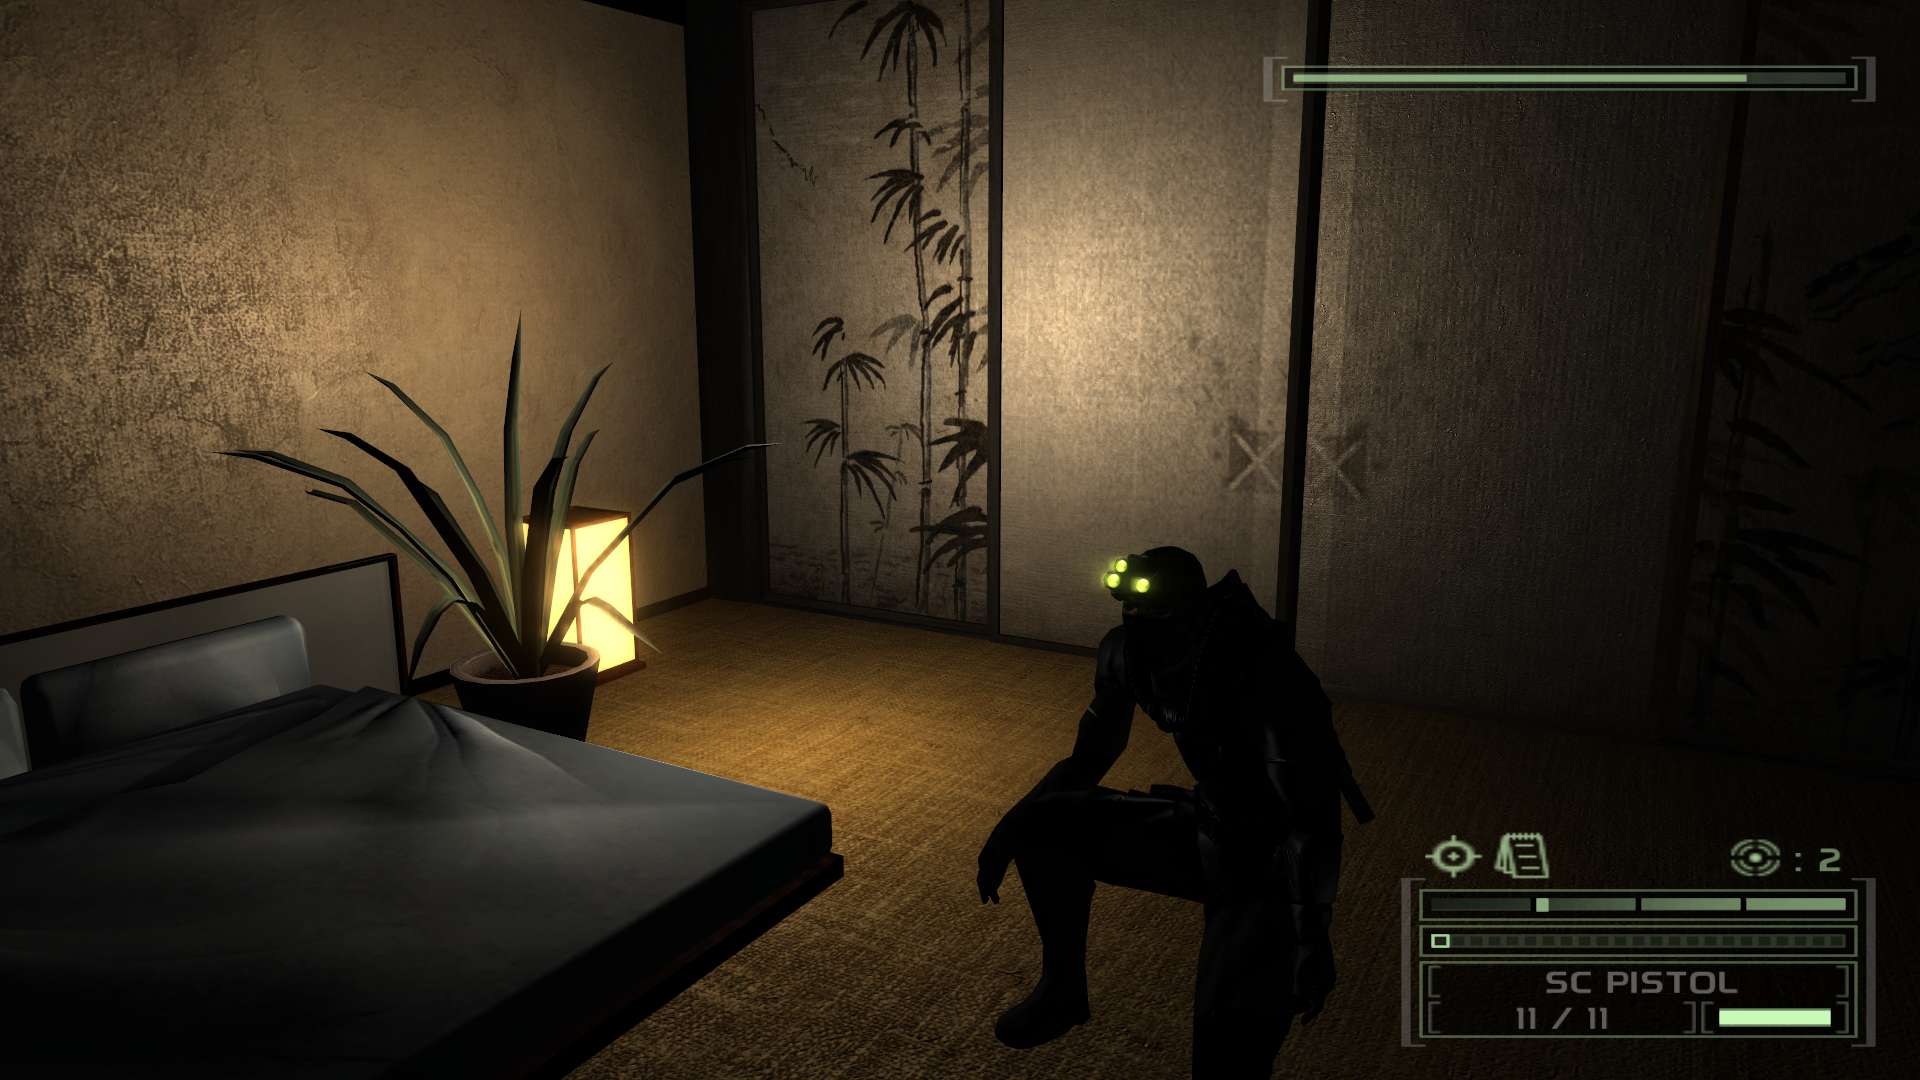 Sam Fisher kneeling in Tom Clancy's Splinter Cell Chaos Theory.